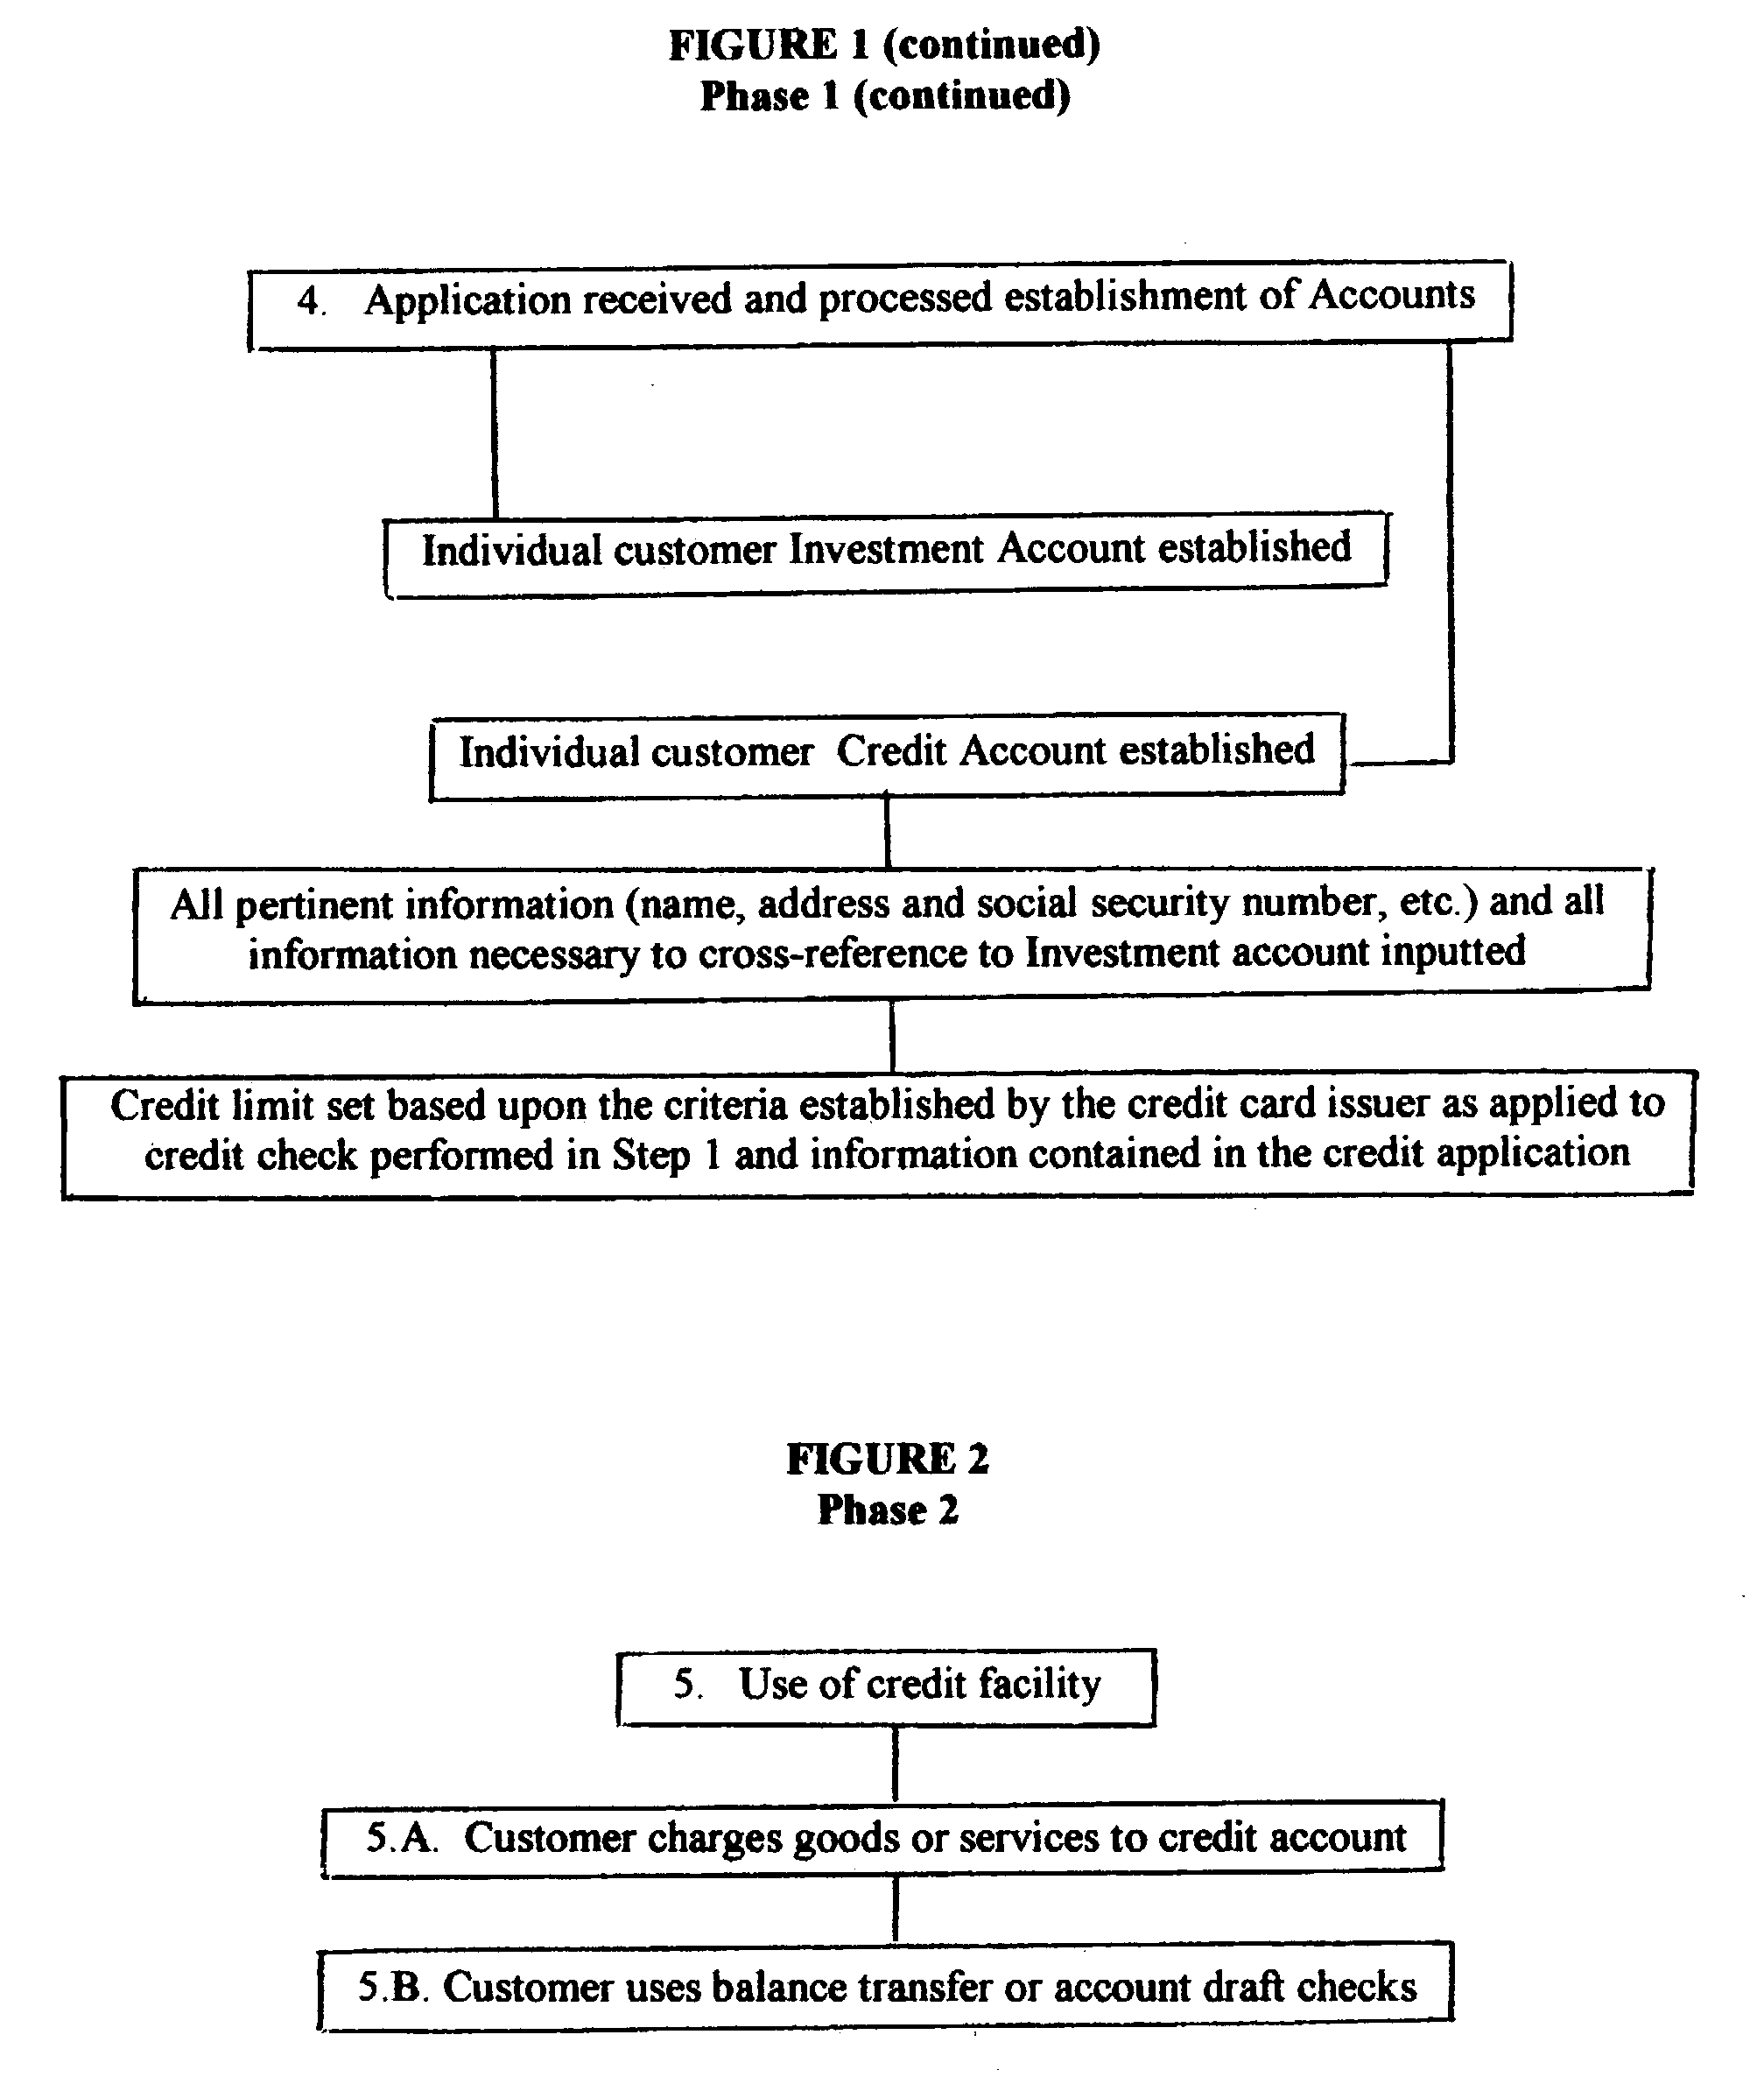 System and method for automatically investing in an investment or savings account by using the "rounded up" of credit card purchase amounts to produce savings/investment amounts